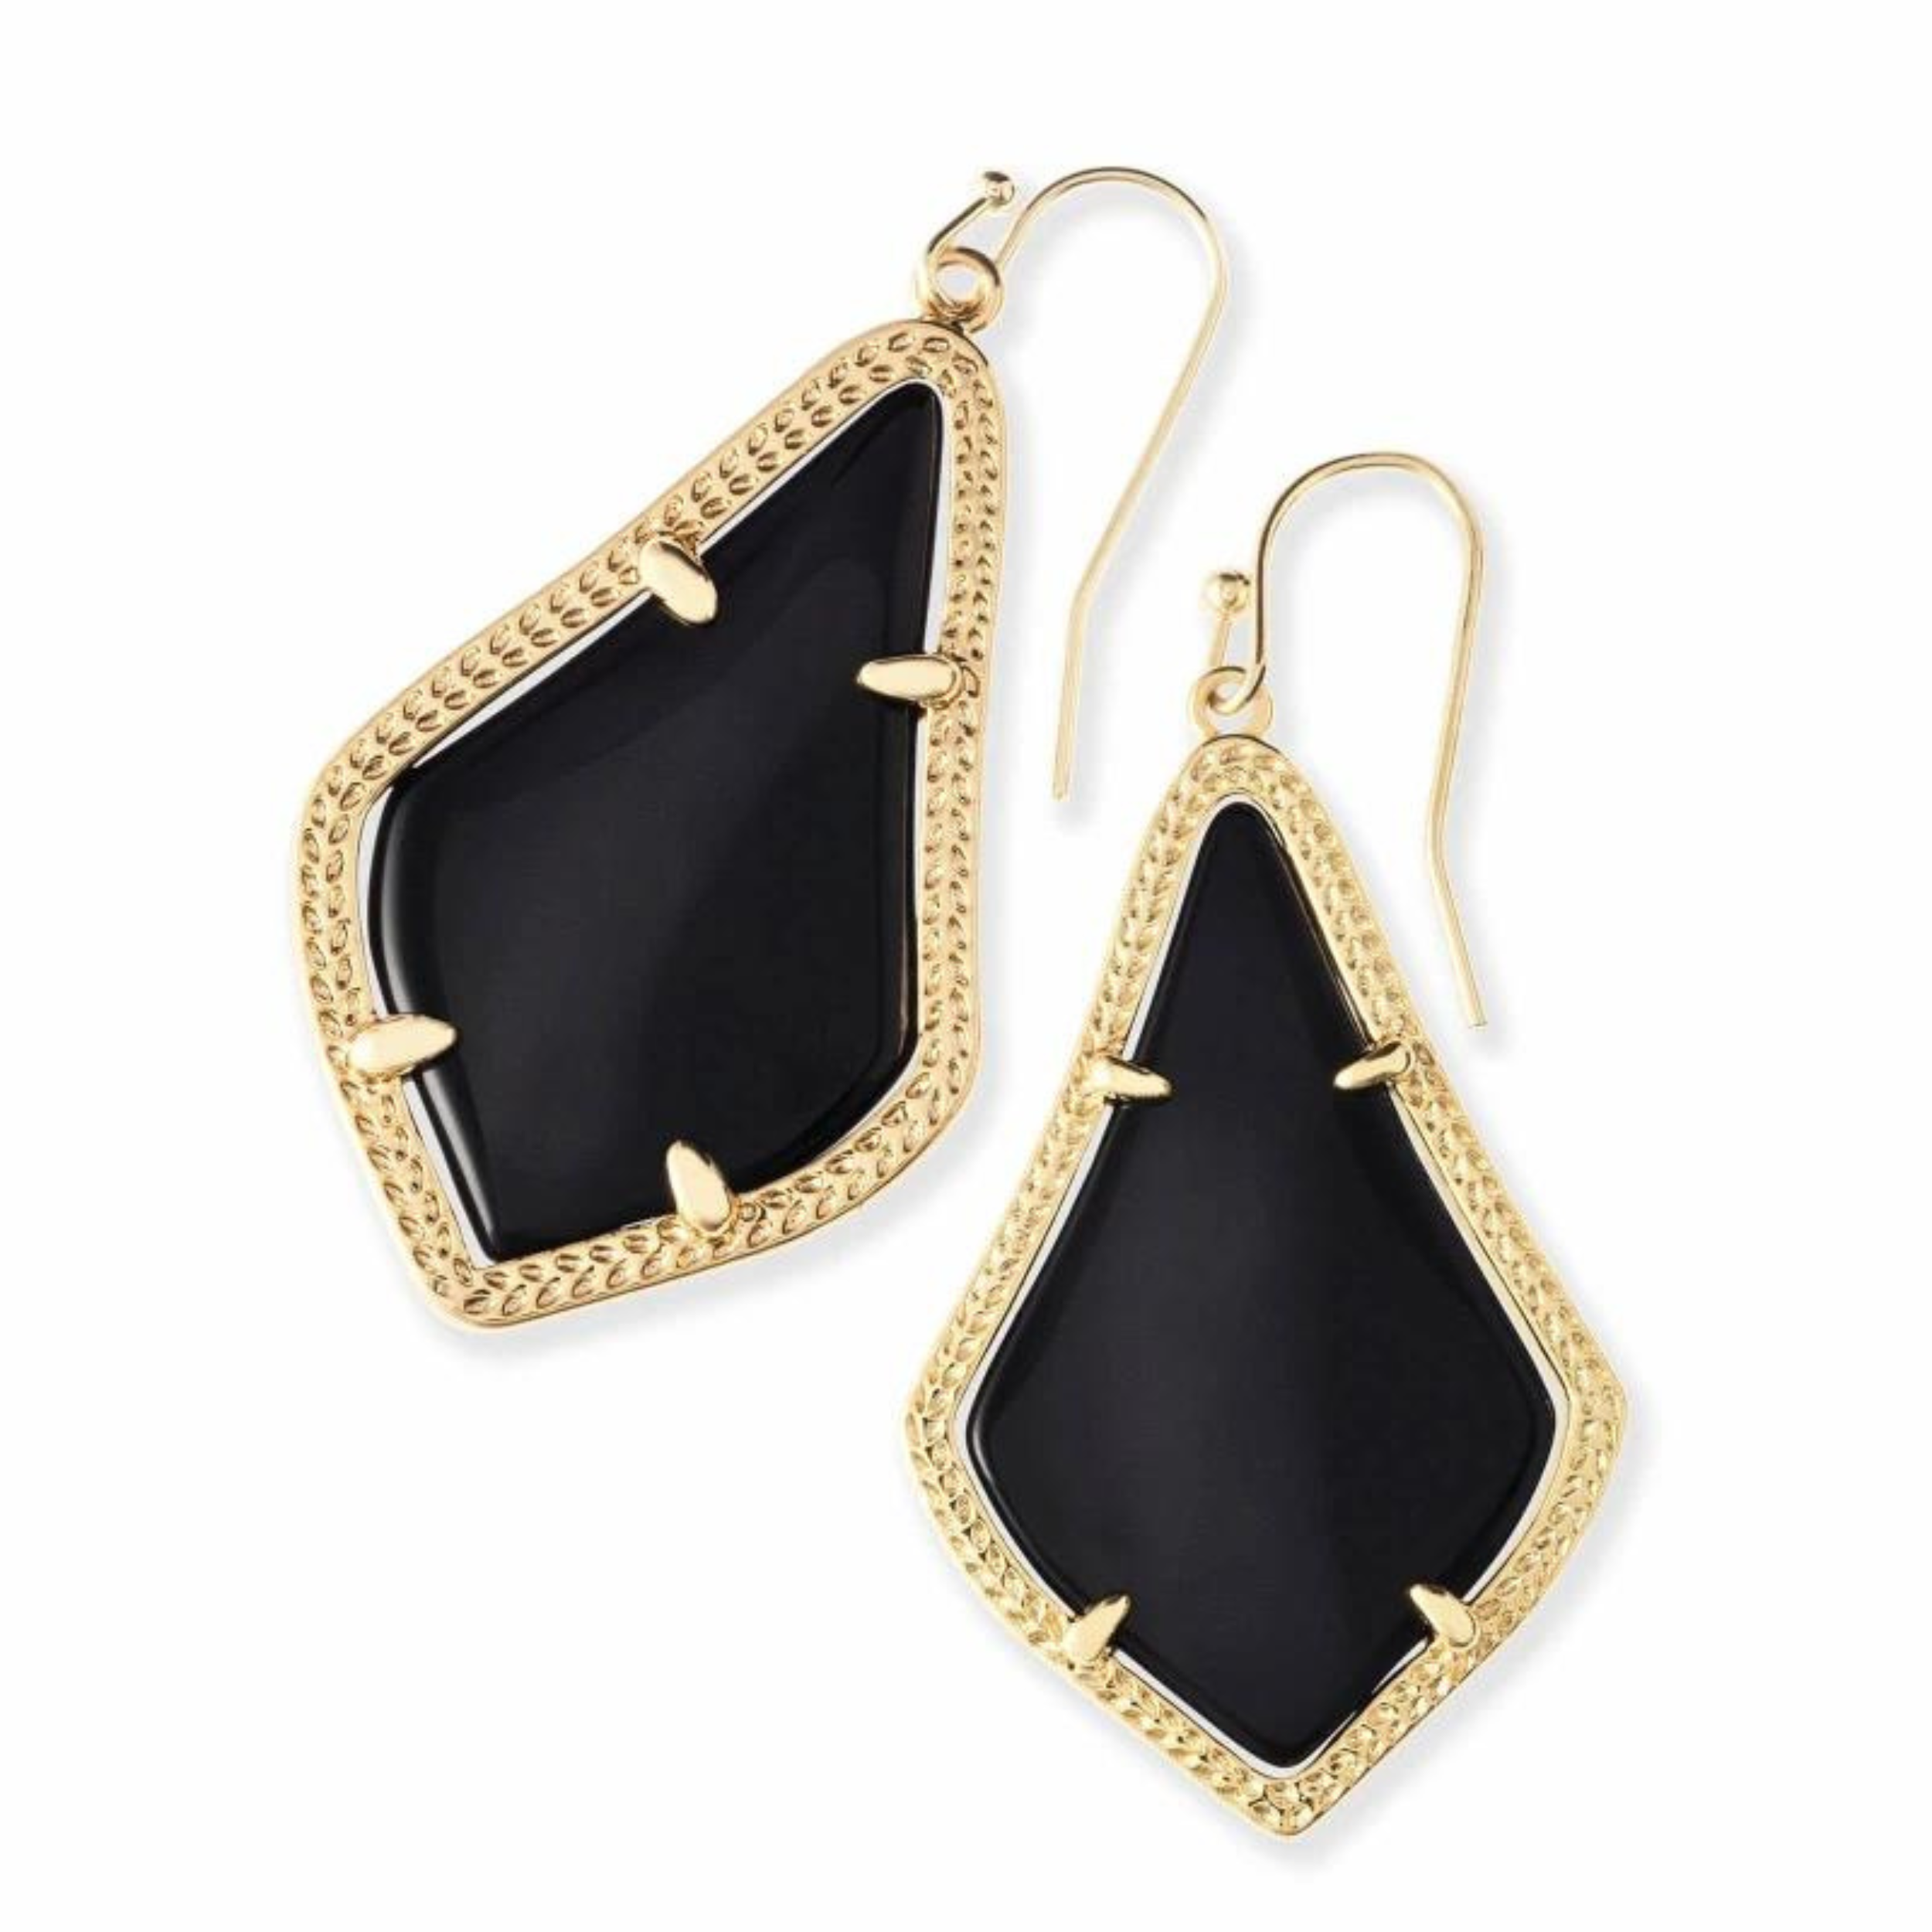 Gold dangle earrings with black opeaque glass stones, pictured on a white background.